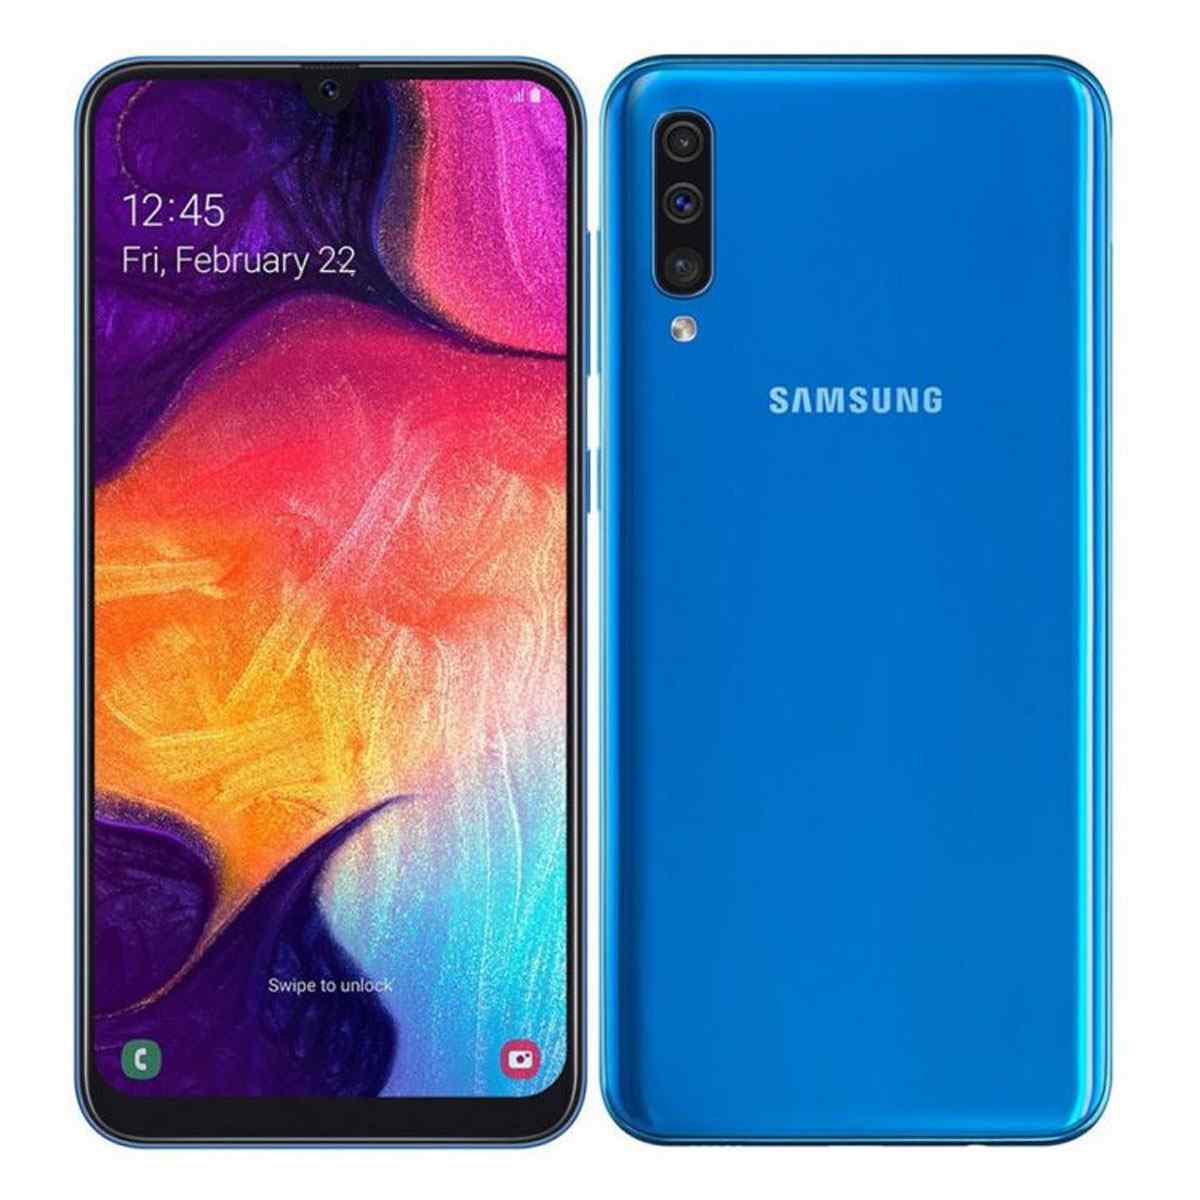 Samsung Galaxy A50 (AT&T Carrier Only)